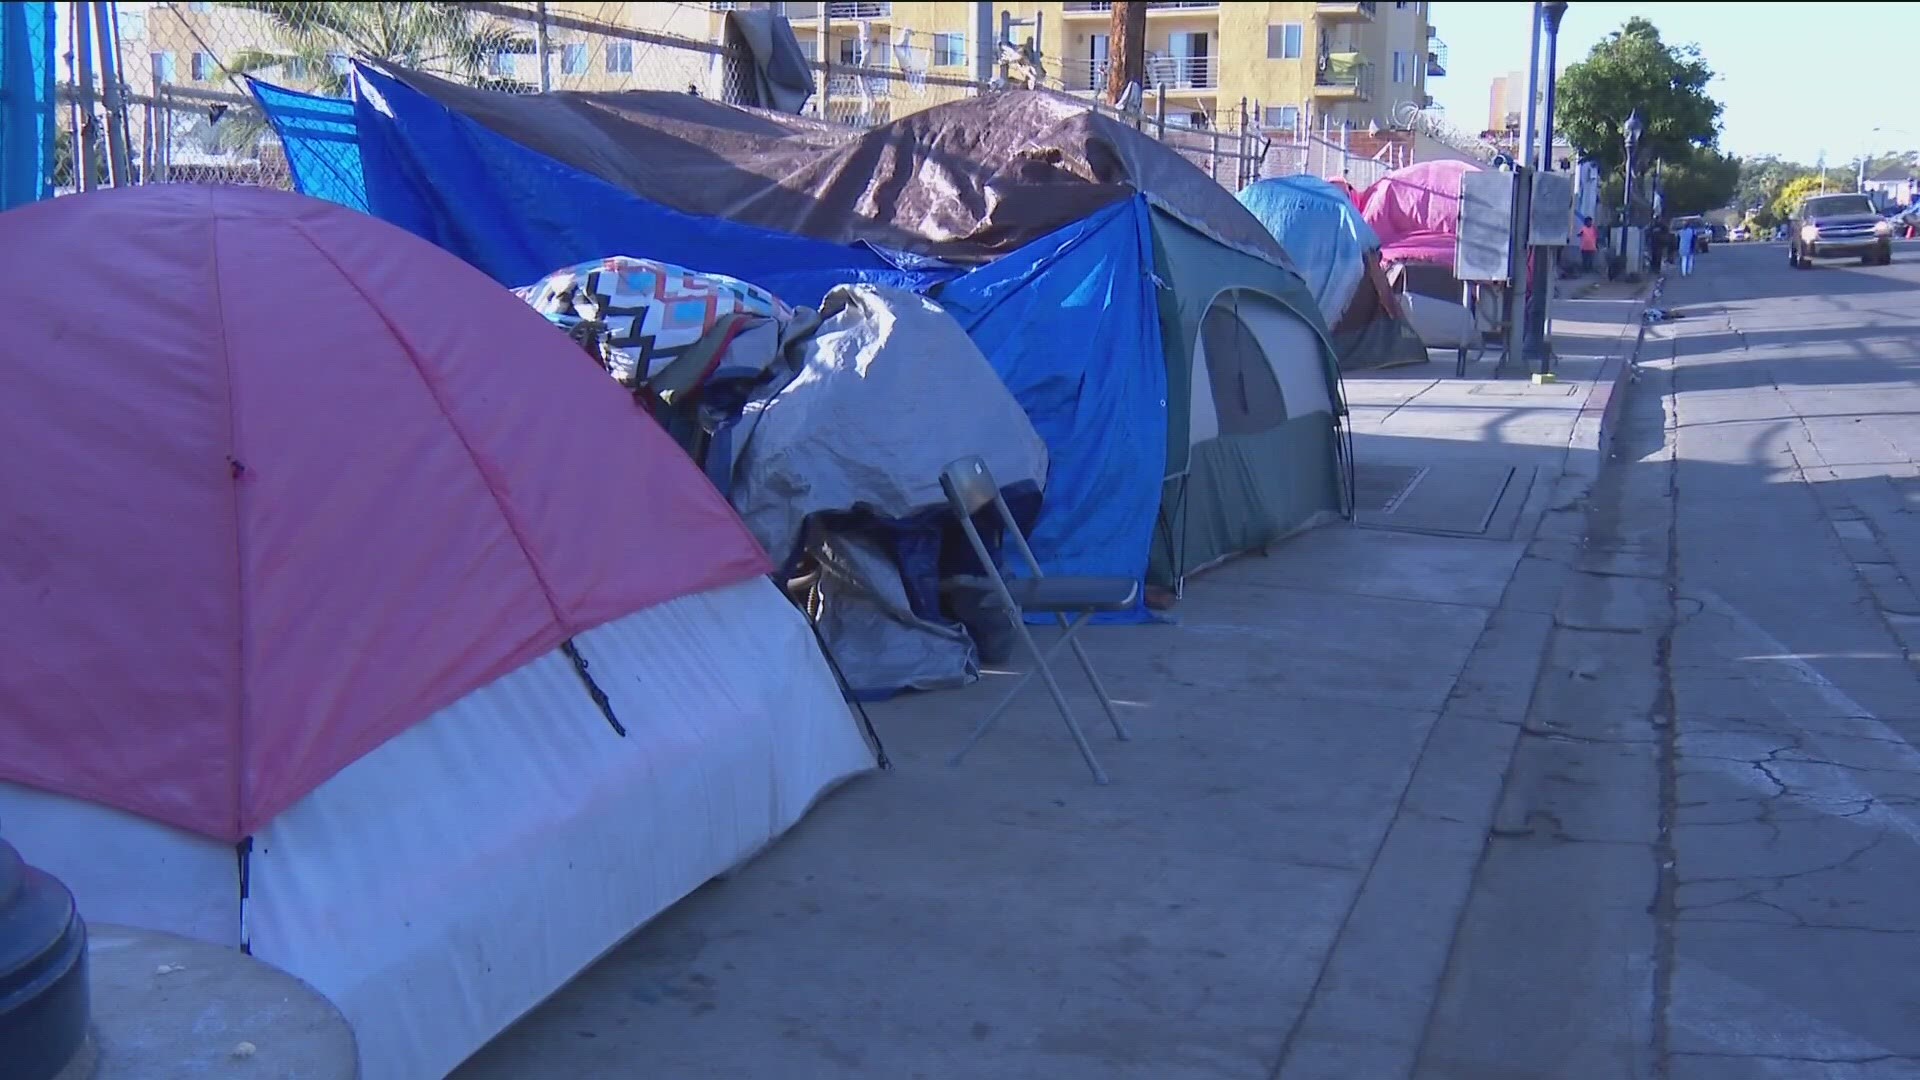 The ordinance prohibits people from setting up tents within two blocks of schools, homeless shelters, trolley tracks and transportation hubs, parks, and waterways.